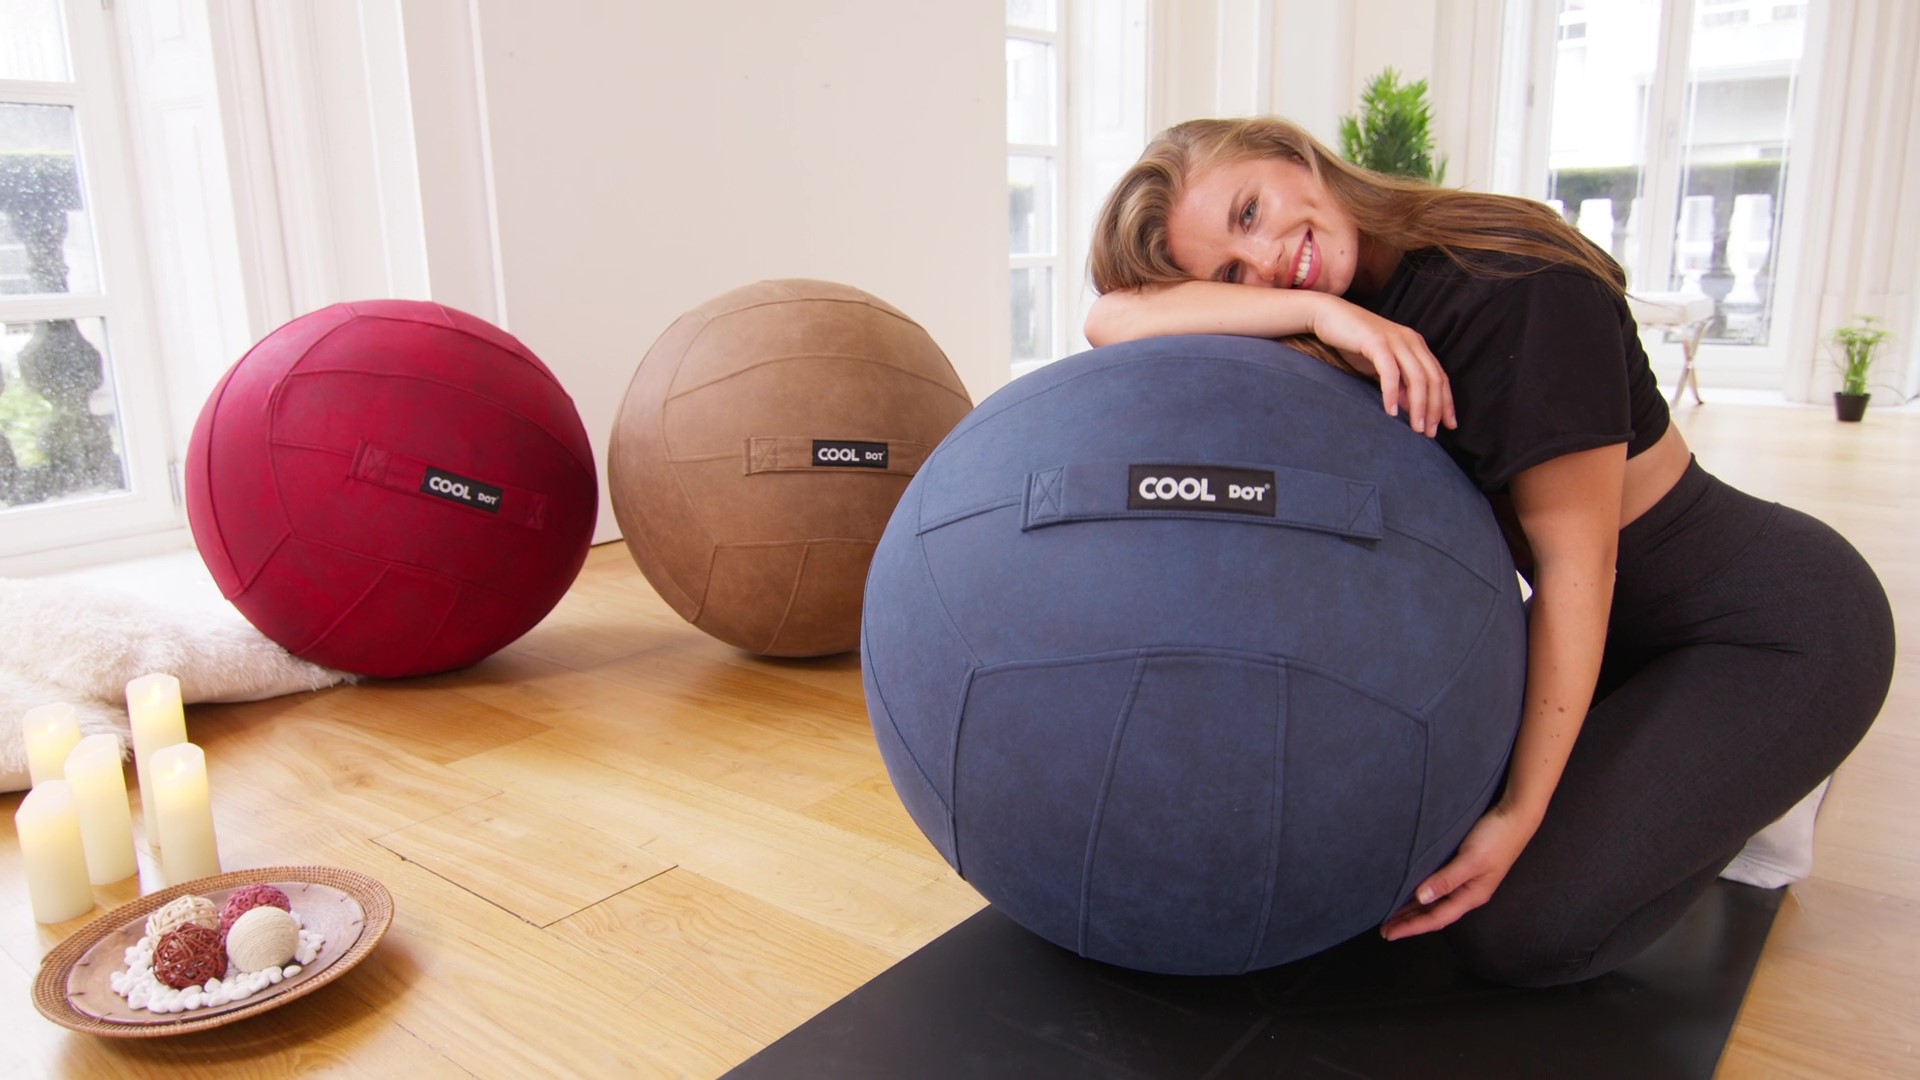 Fitball: 5 health and fitness benefits - Health & Wellbeing